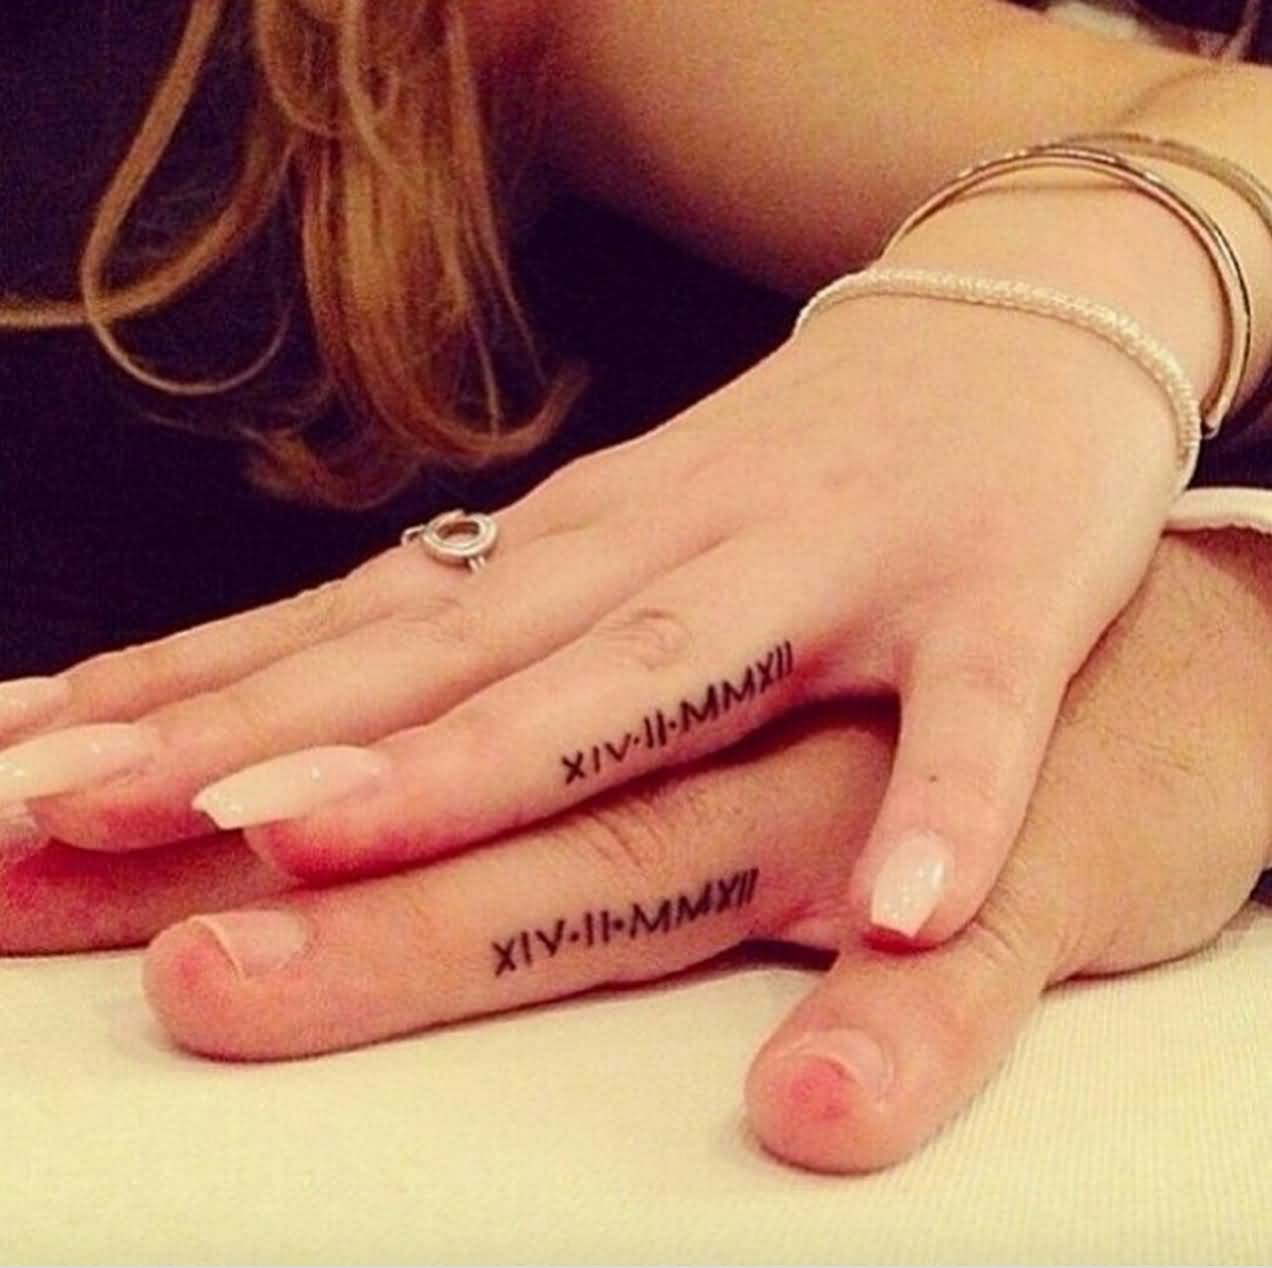 Small Roman Numerals Matching Couple Tattoos On Fingers